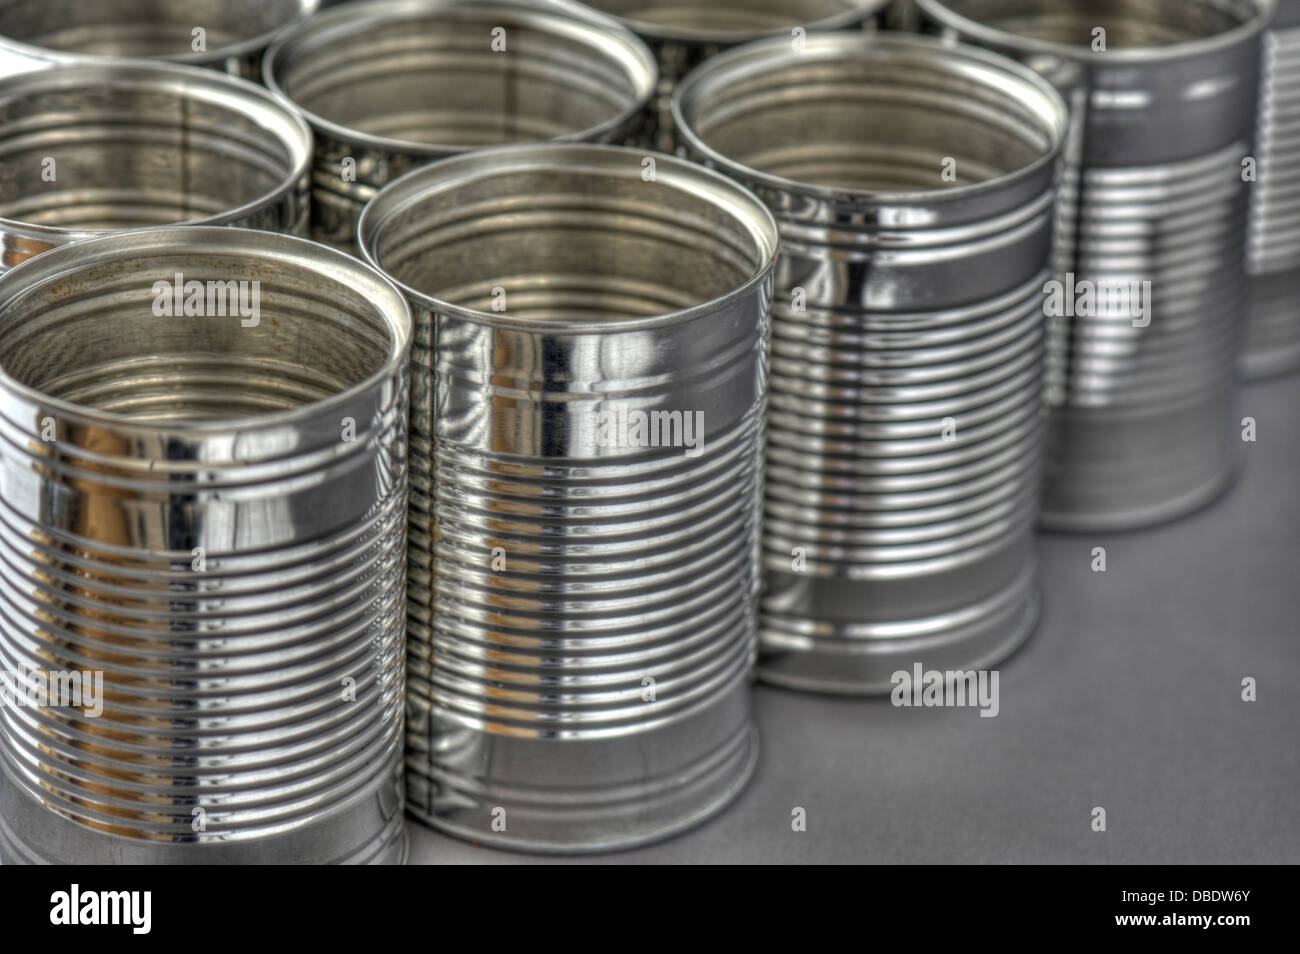 Close-up of empty food cans Stock Photo